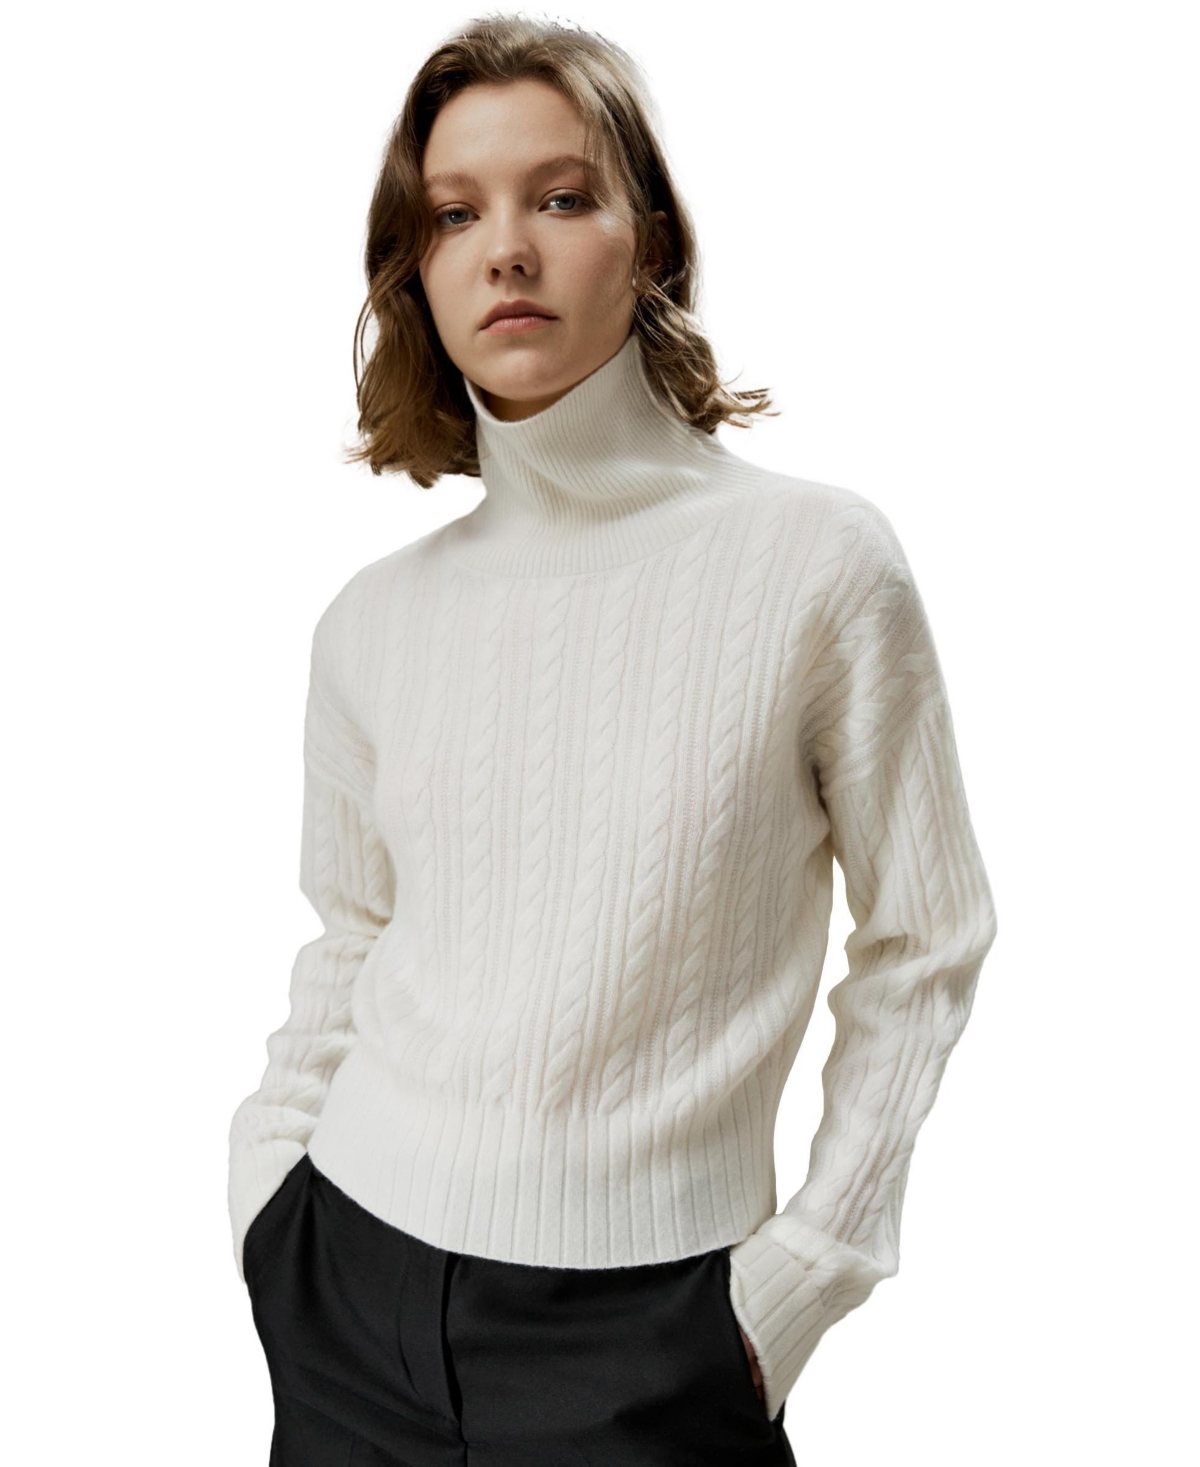 Women's Classic Cable Knit Turtleneck Sweater - White